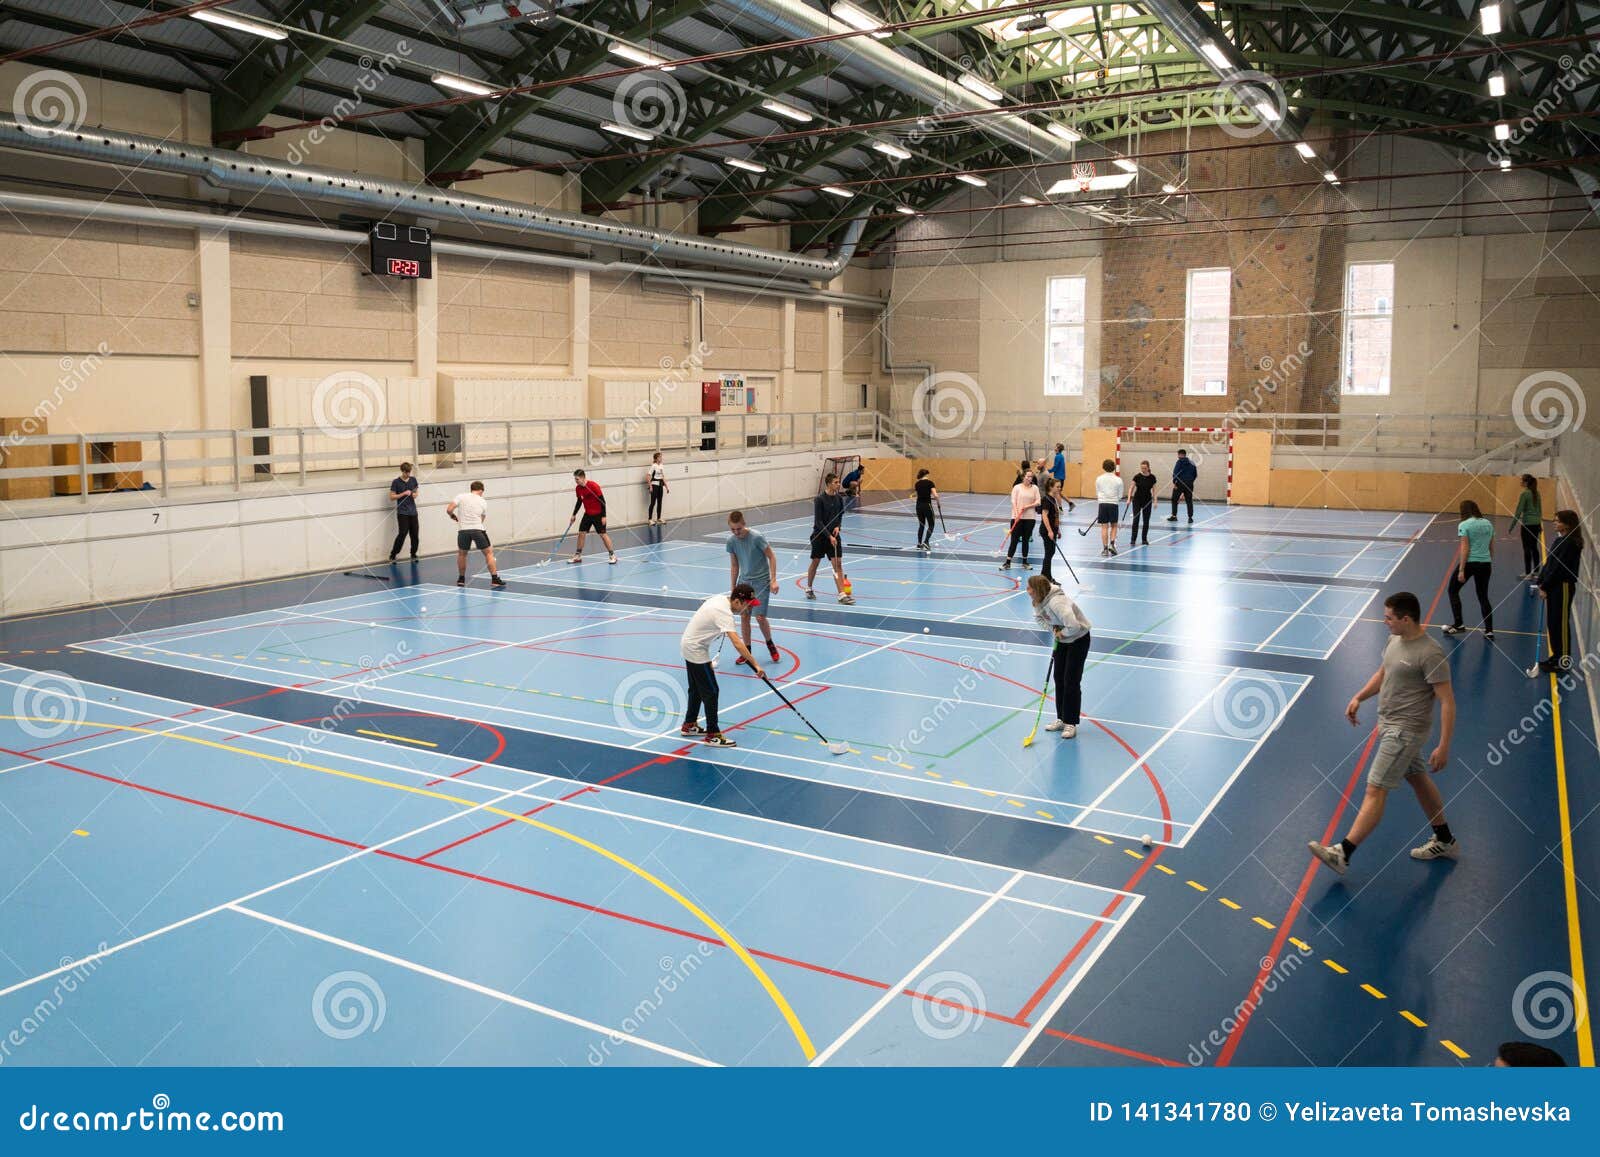 February 21, 2019. Denmark. Copenhagen. Team game with stick and ball Floorball or hockey in hall. Inside training in the gym of the school college. Group of teen caucasian students playing a game